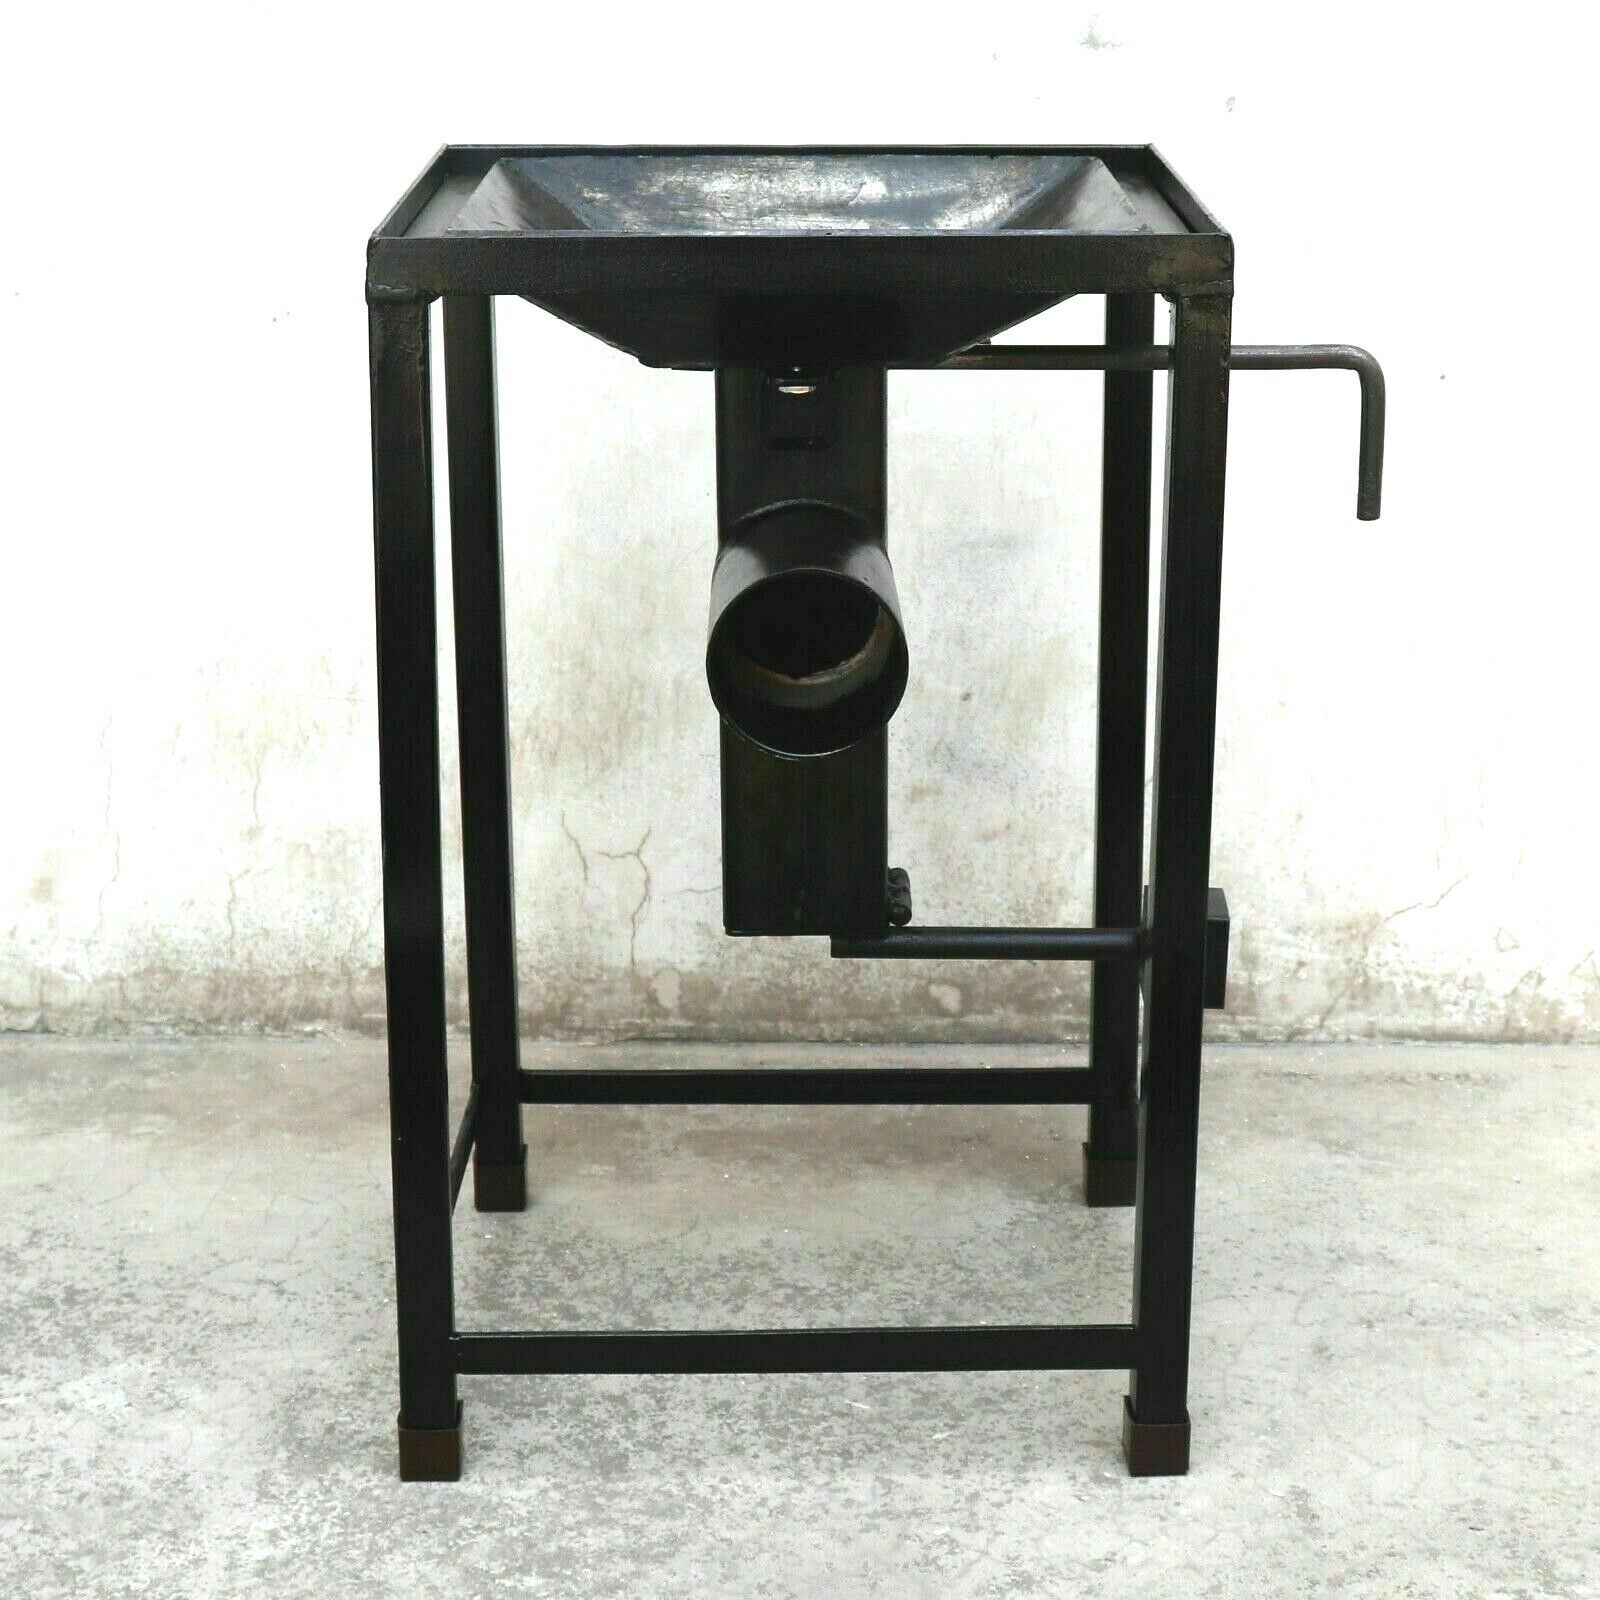 Welded Blacksmithing Firepot For Black Smith Coal Forge Pot 14X12 Inch